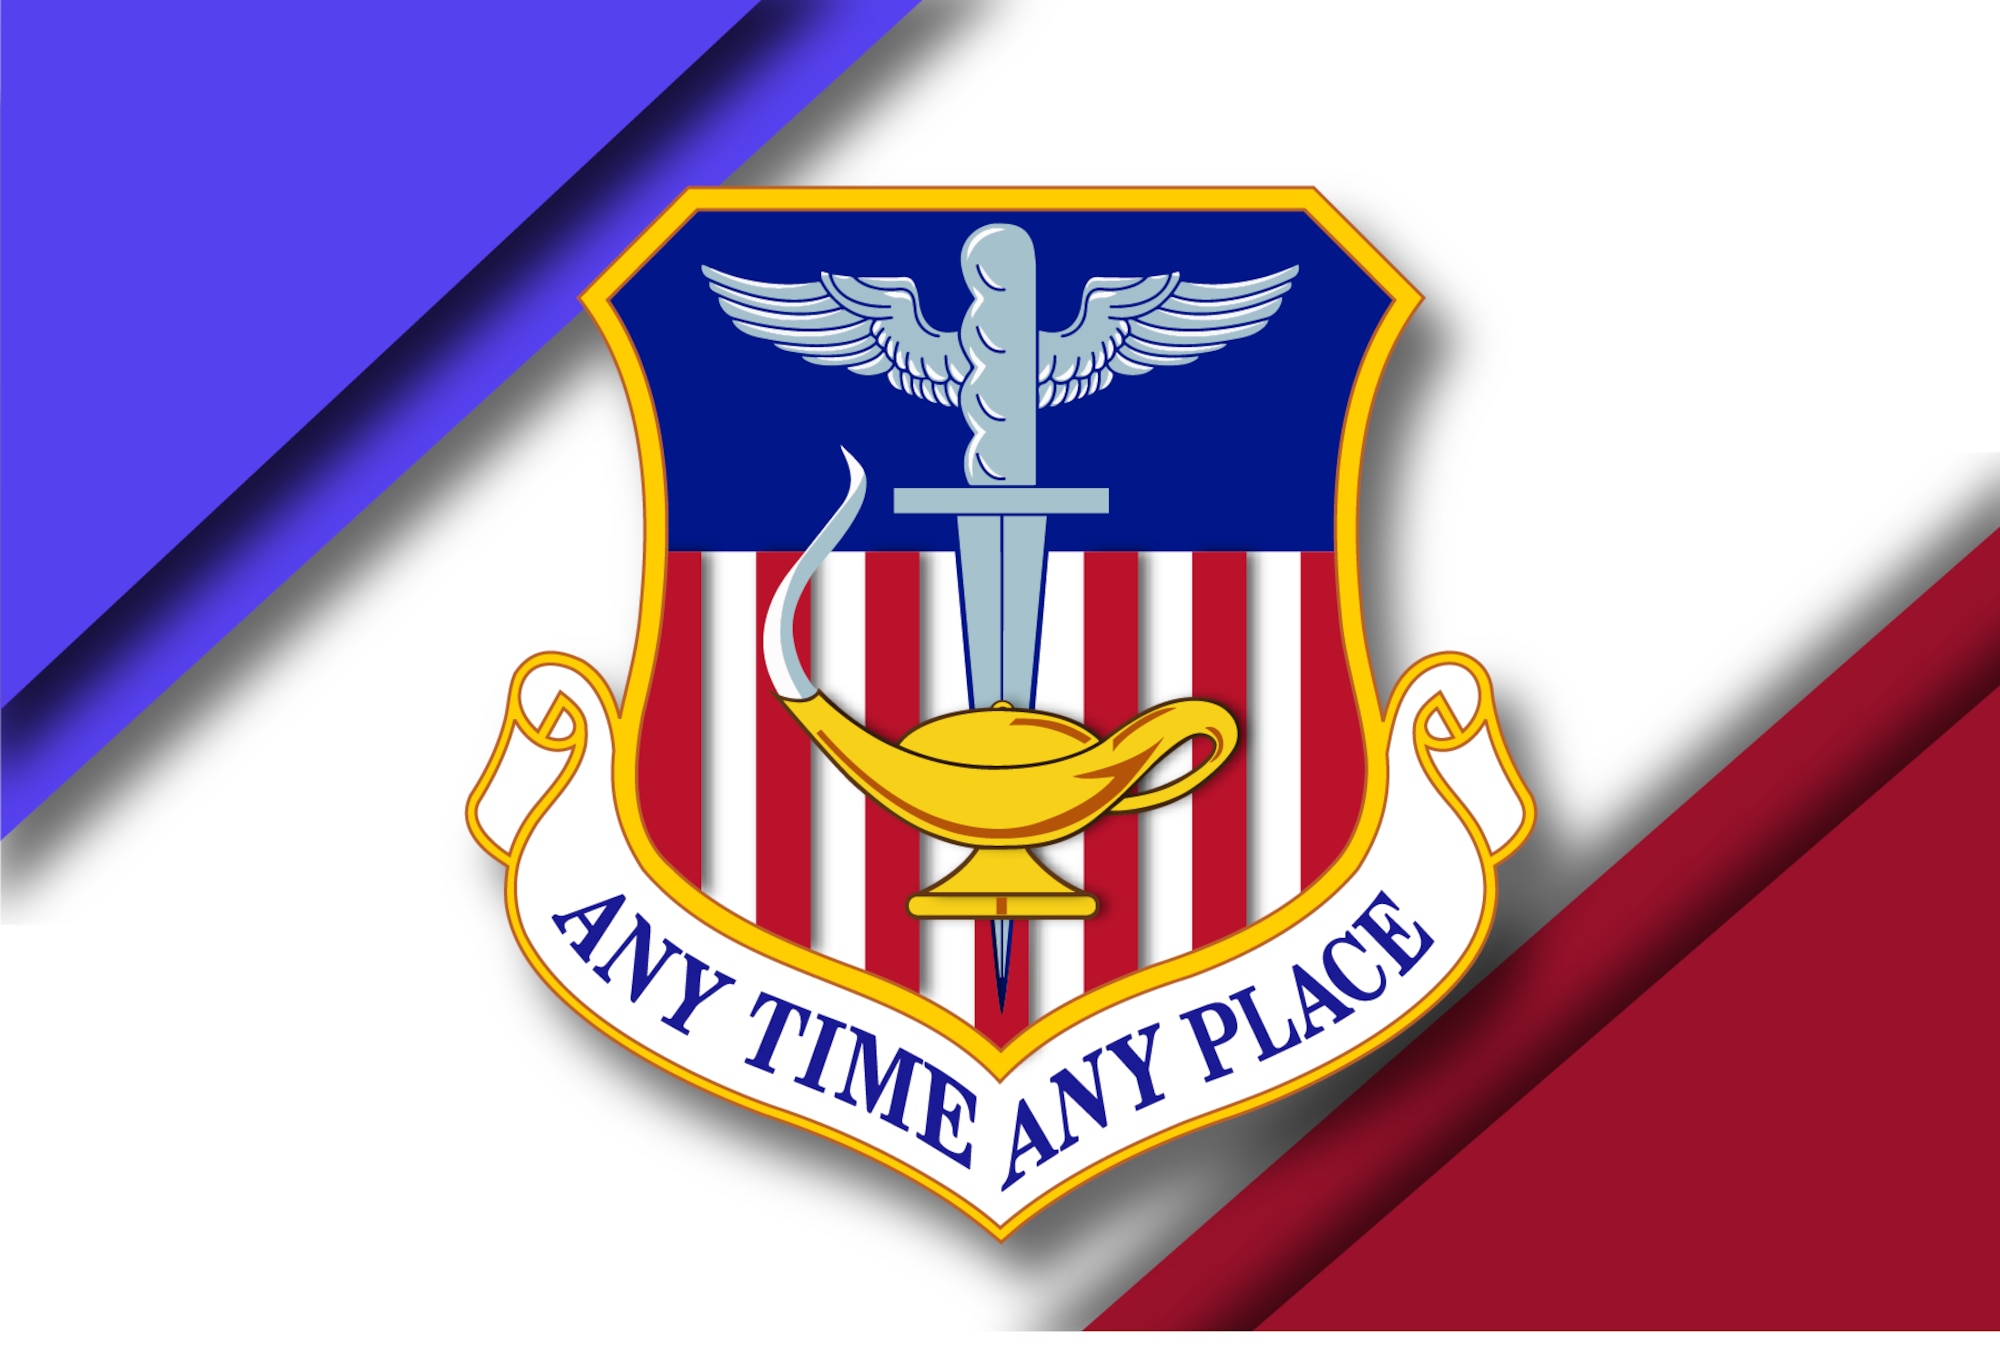 1st Special Operations Wing shield on rectangle graphic with blue upper left corner, red lower right corner, and white background between.